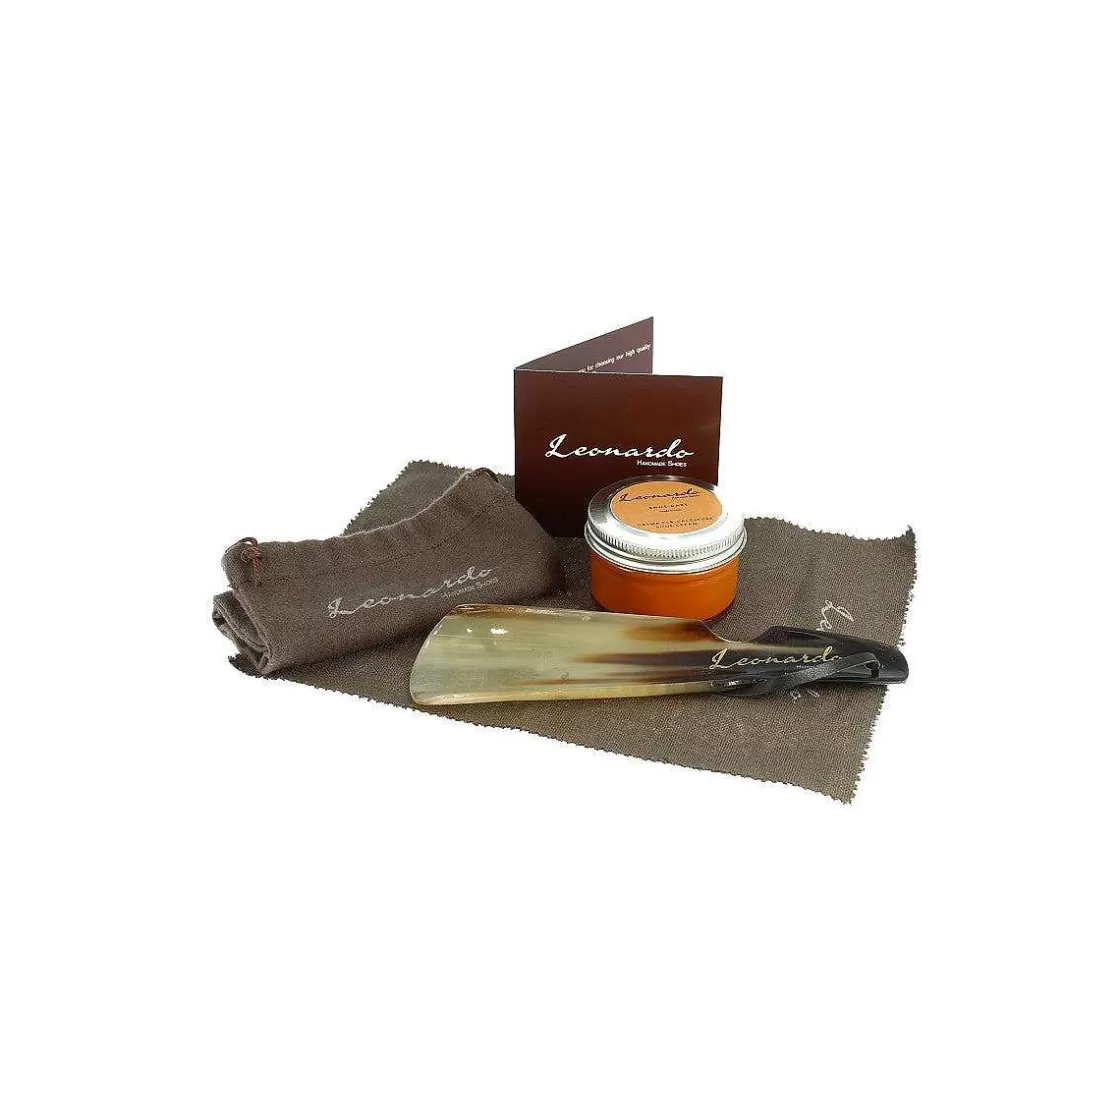 Leonardo Leather Shoe Kit With Shoehorn And Color Polish Best Sale